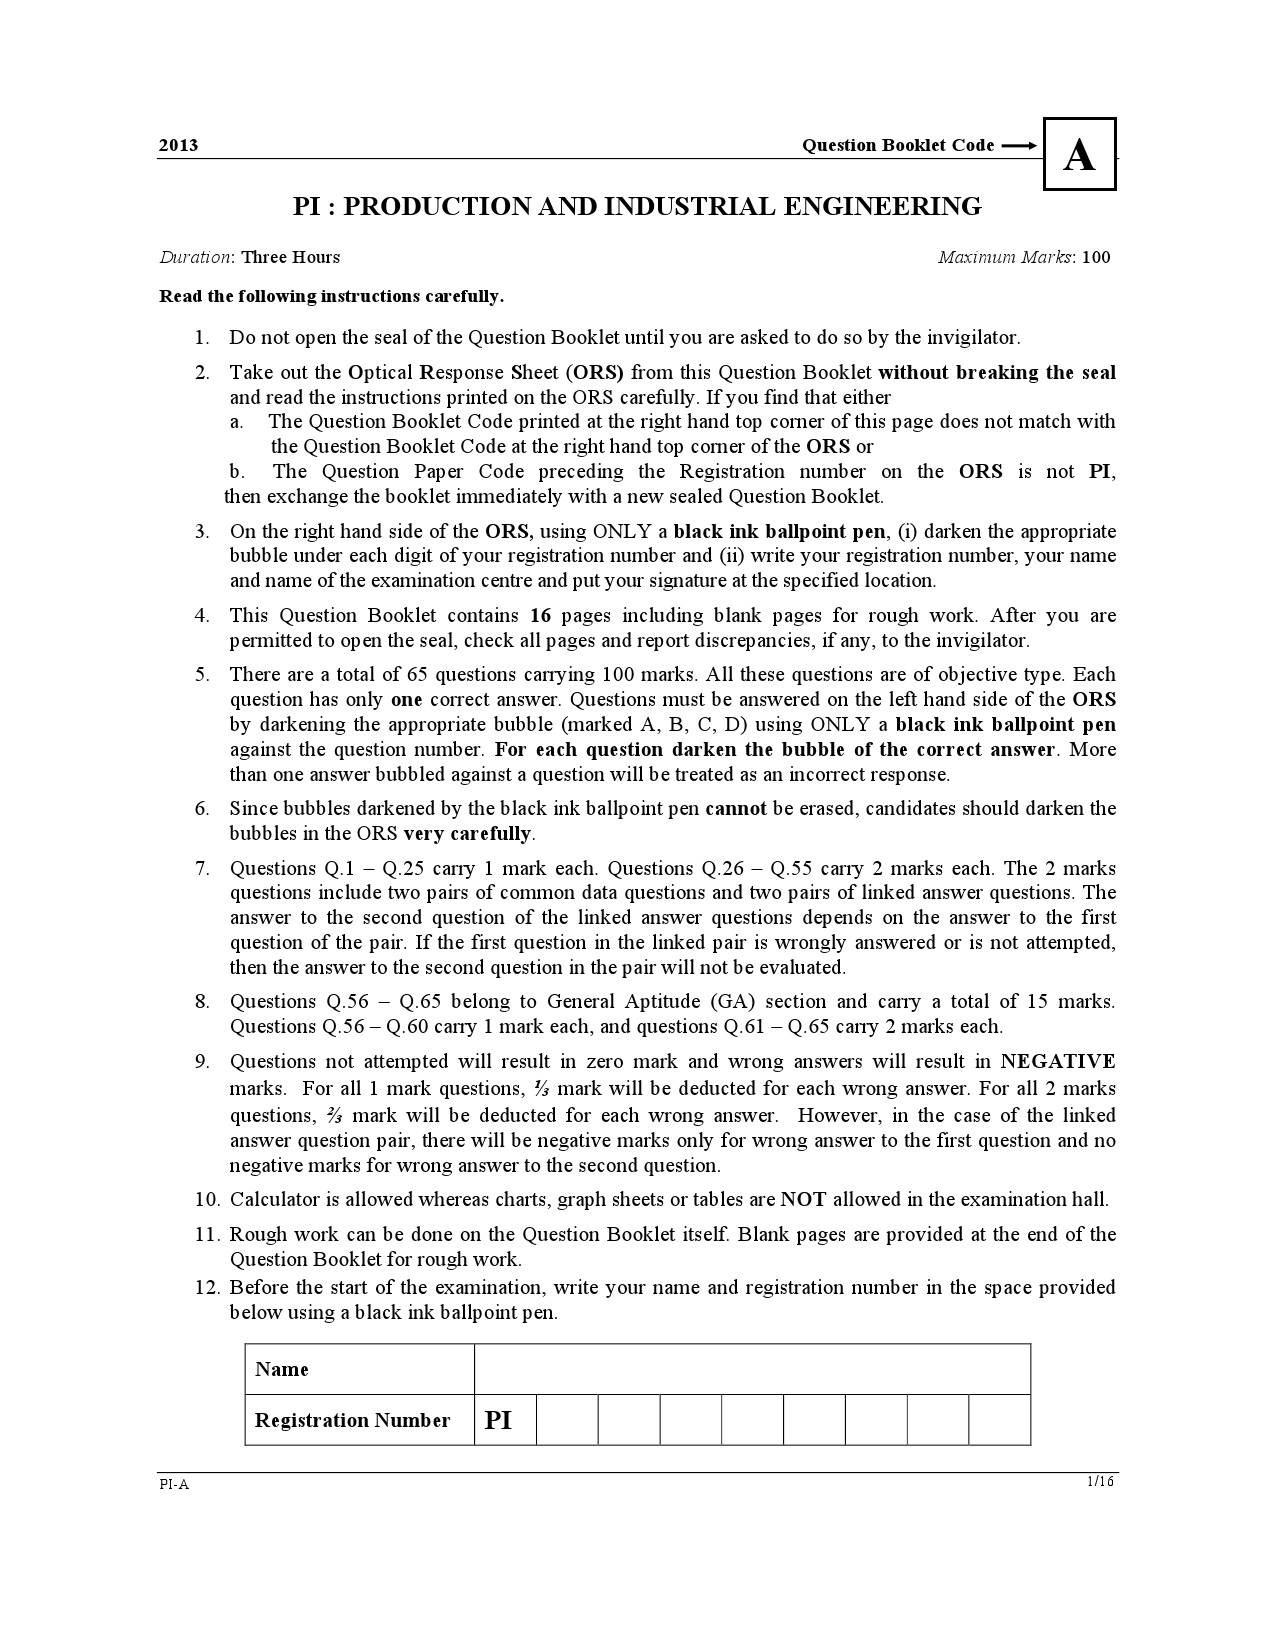 GATE Exam Question Paper 2013 Production and Industrial Engineering 1